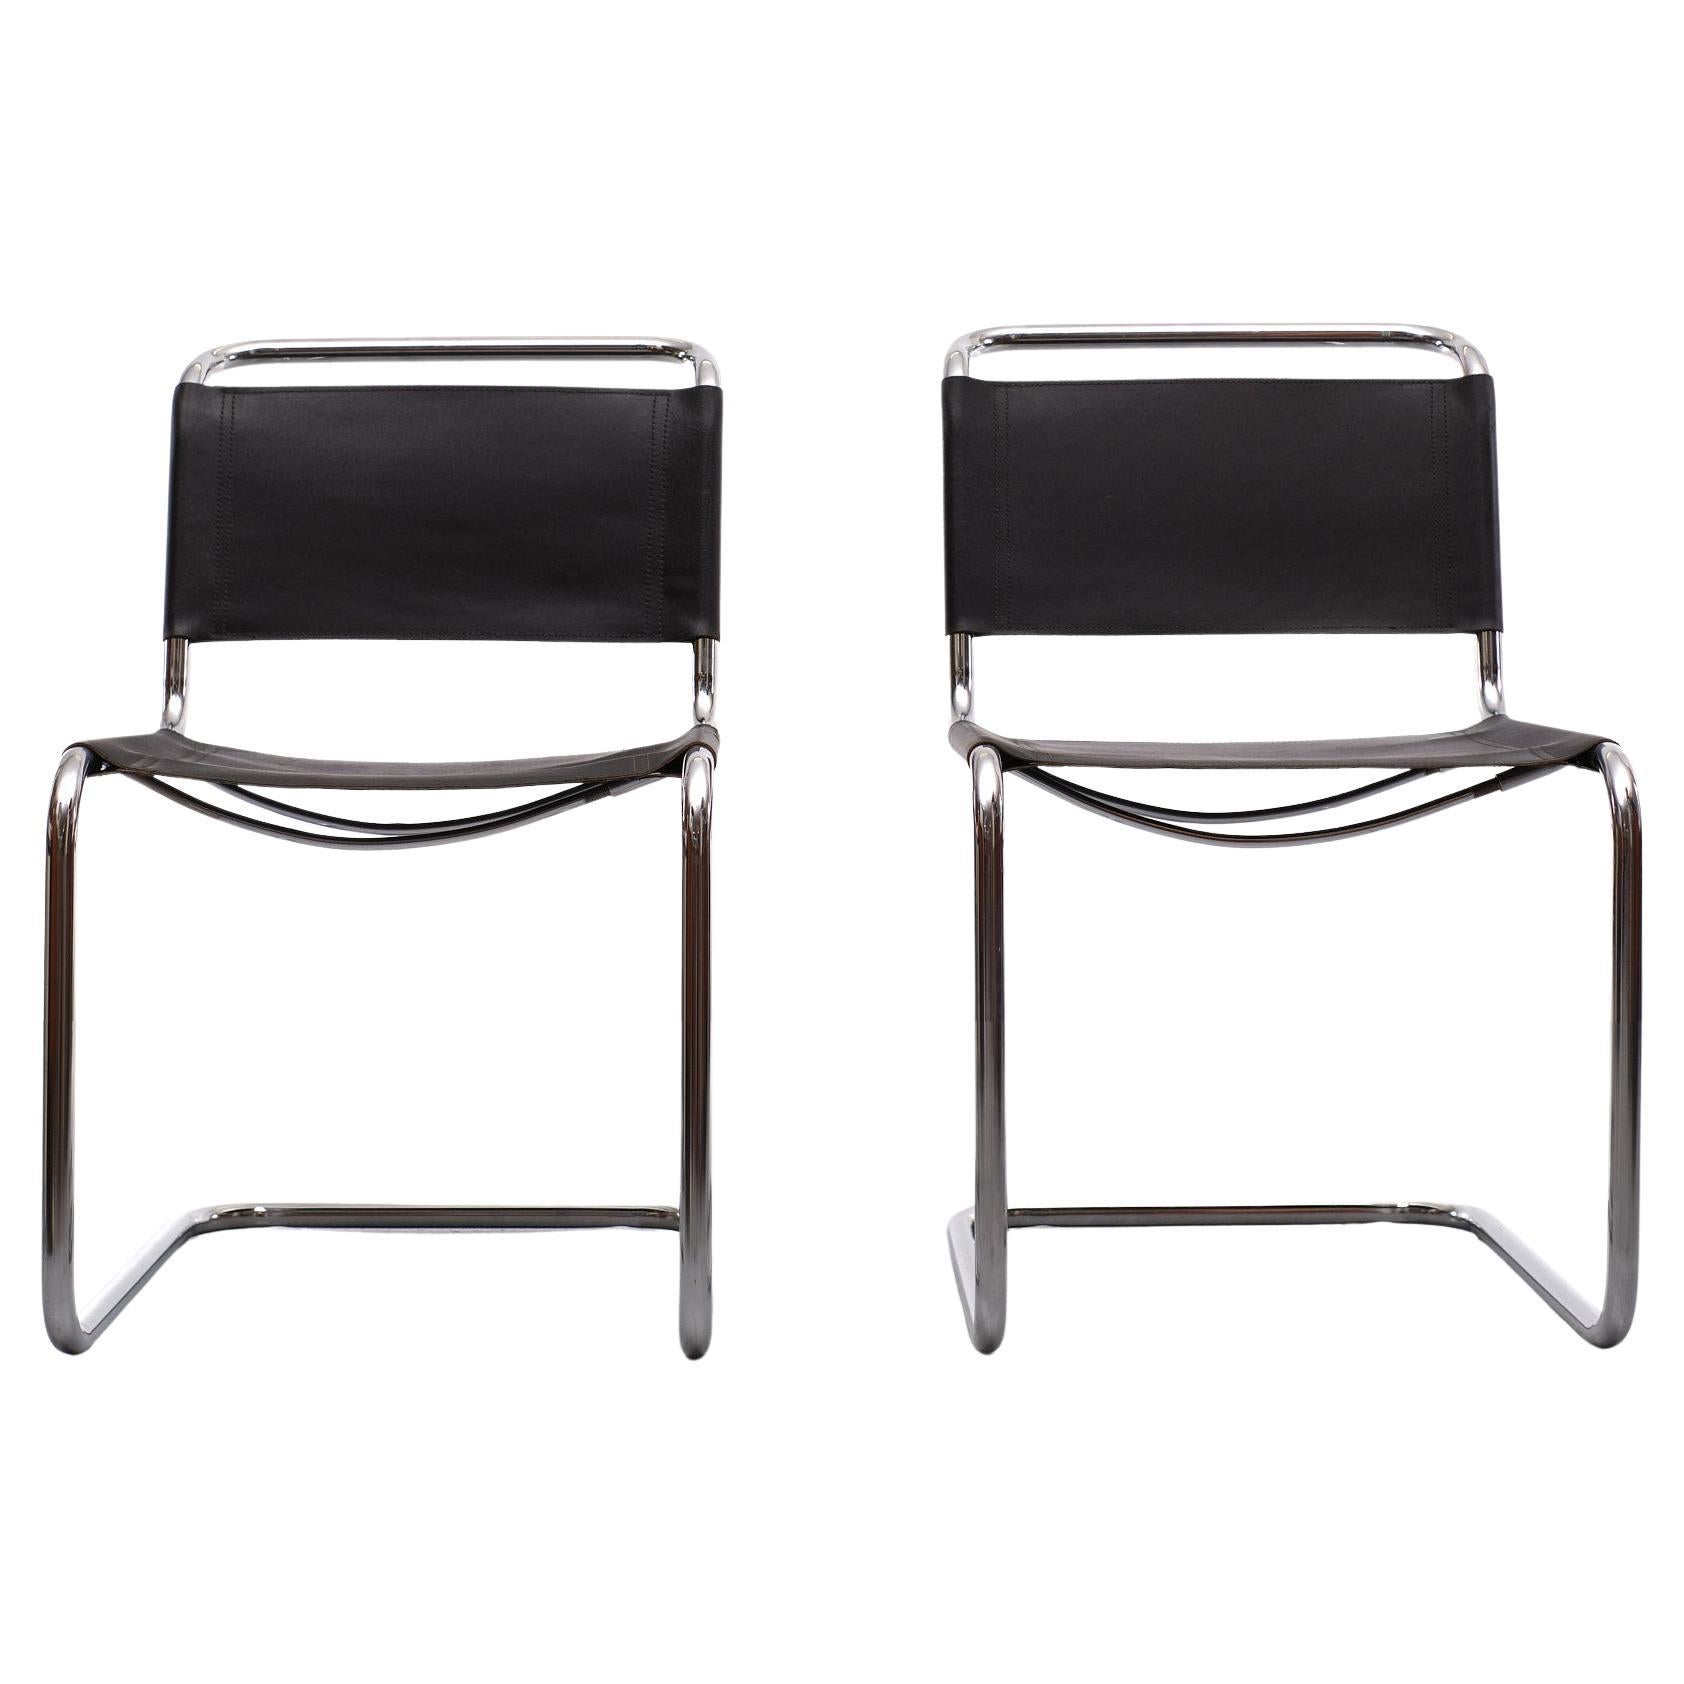 Chrome tubular cantilever chair steel frame floating chair black leather design classic, Dutch Design! Late in the twenties Mart Stam was guest lecturer at the Bauhaus (’28 & ’29) where Marcel Breuer became “inspired” by Stam’s designs similar